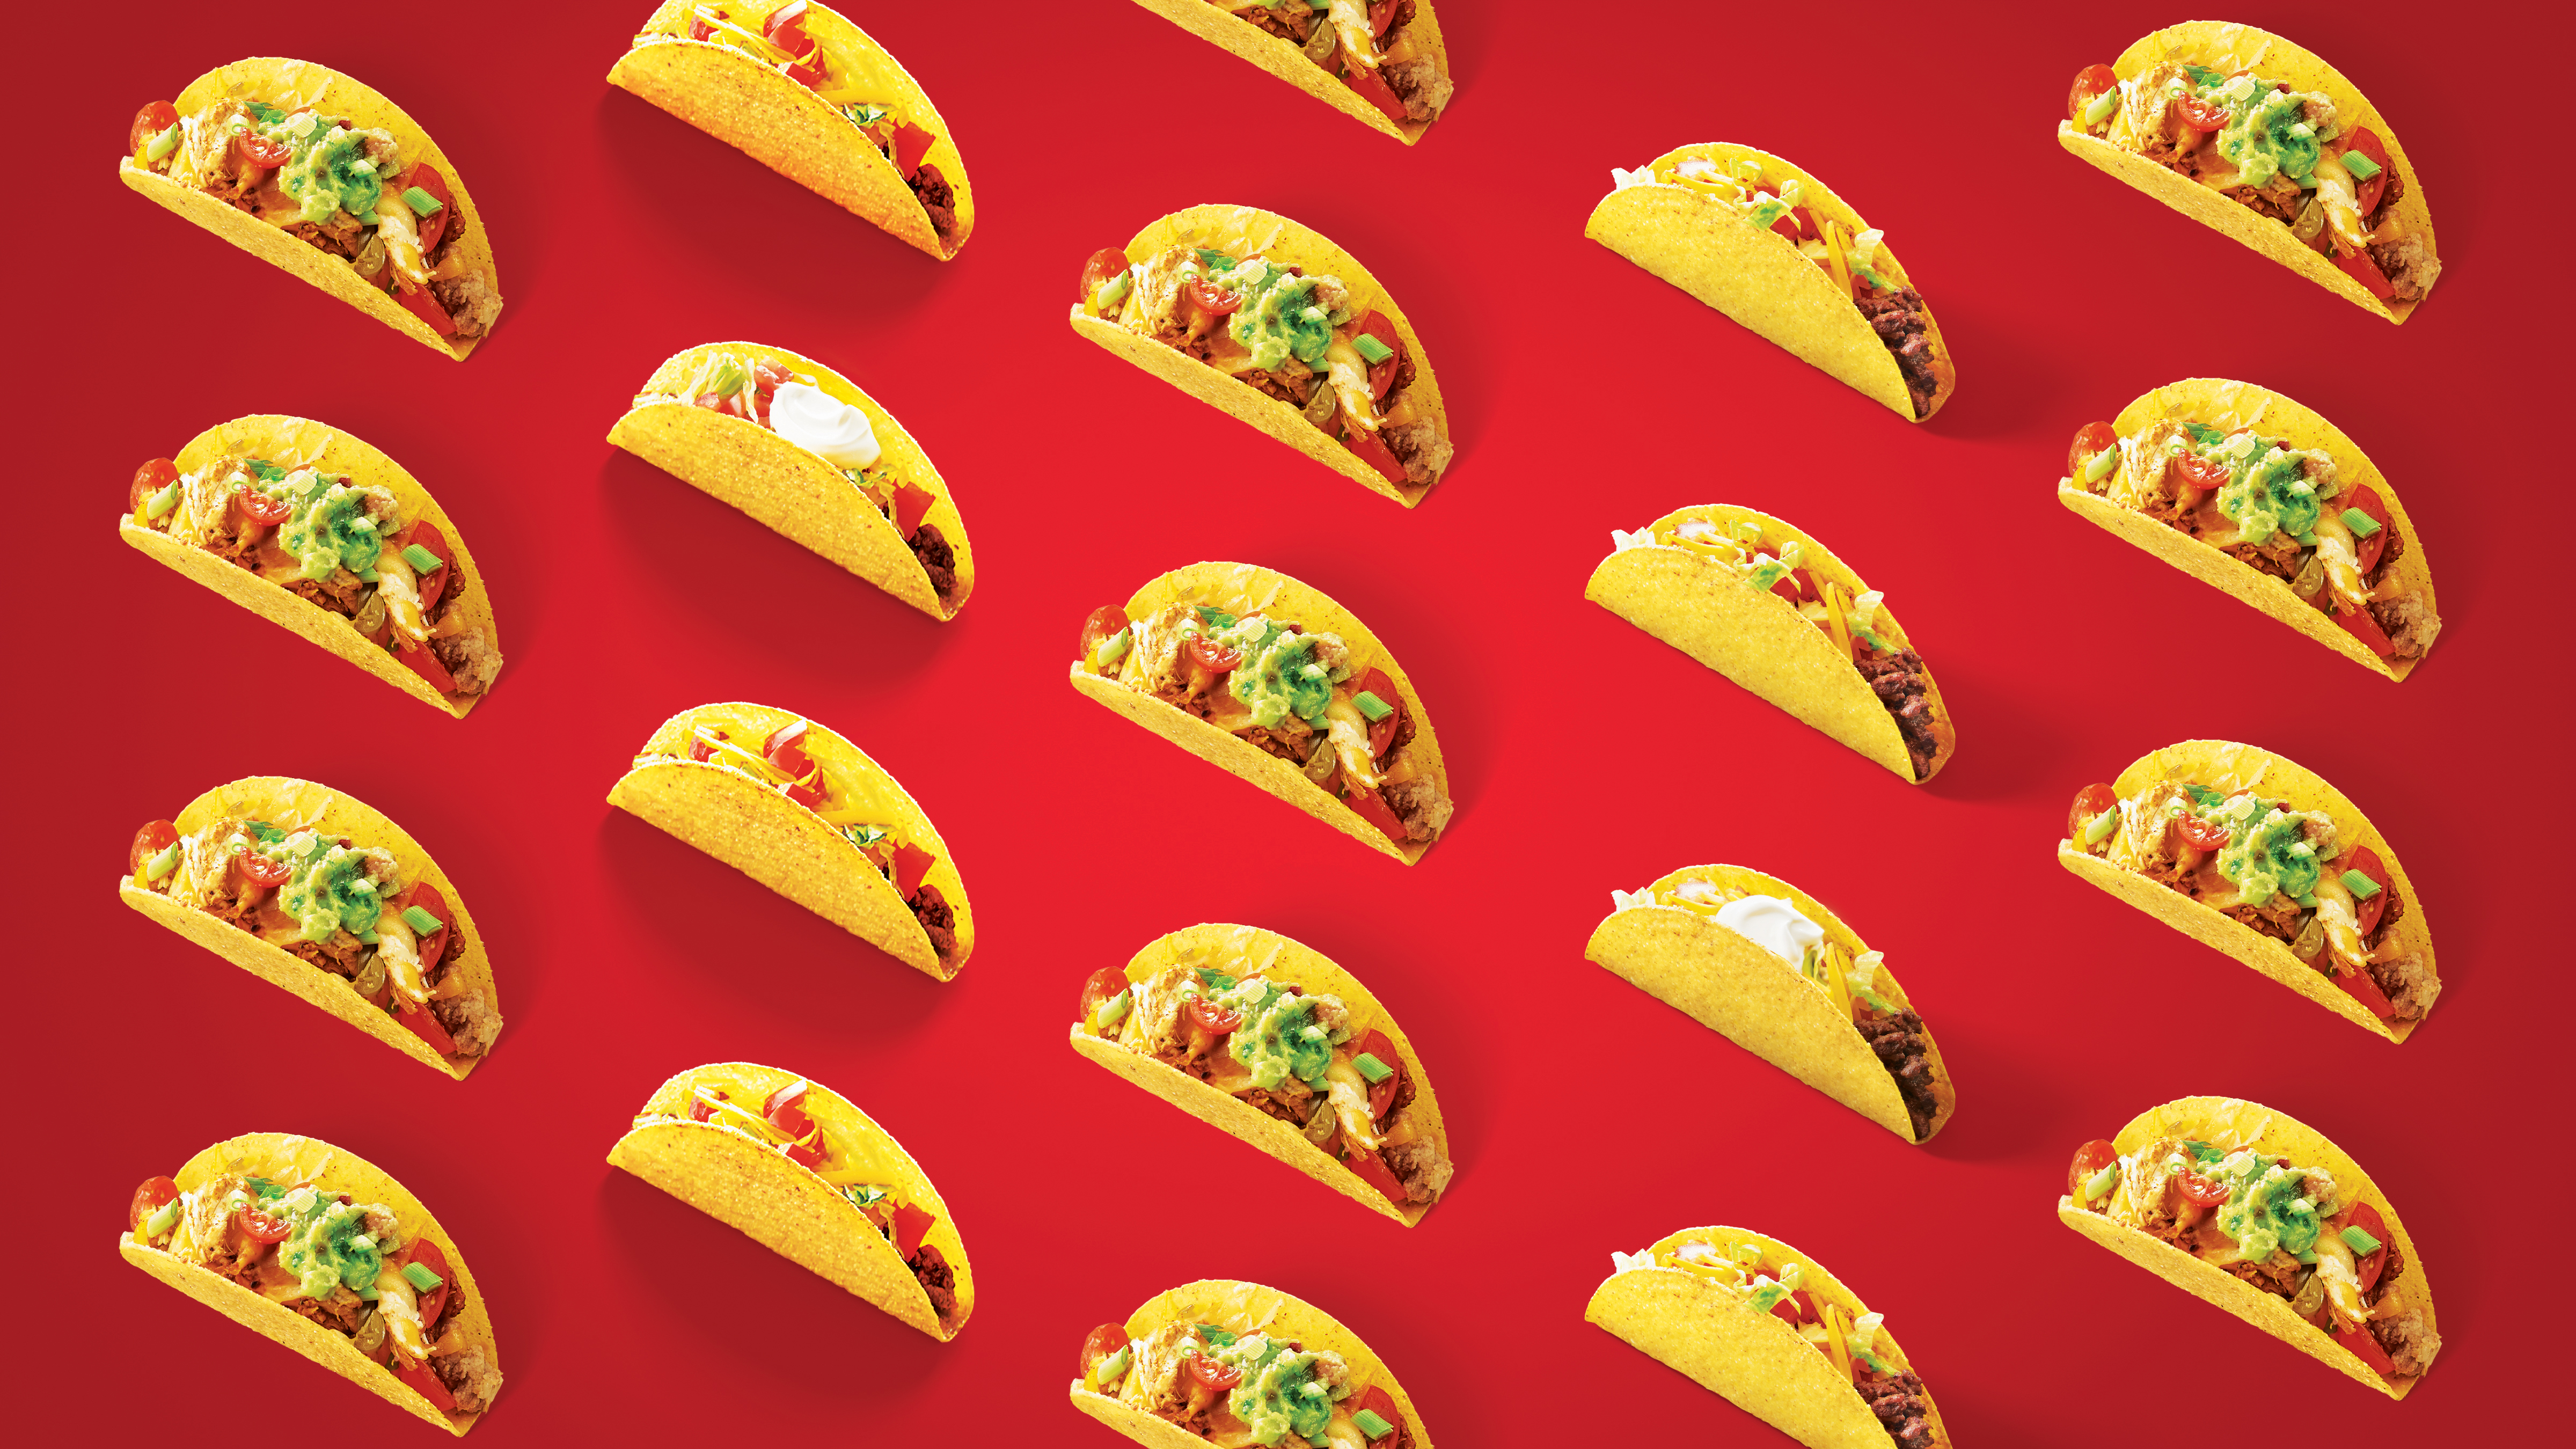 old-el-paso-wraps-product-image-on-red-background